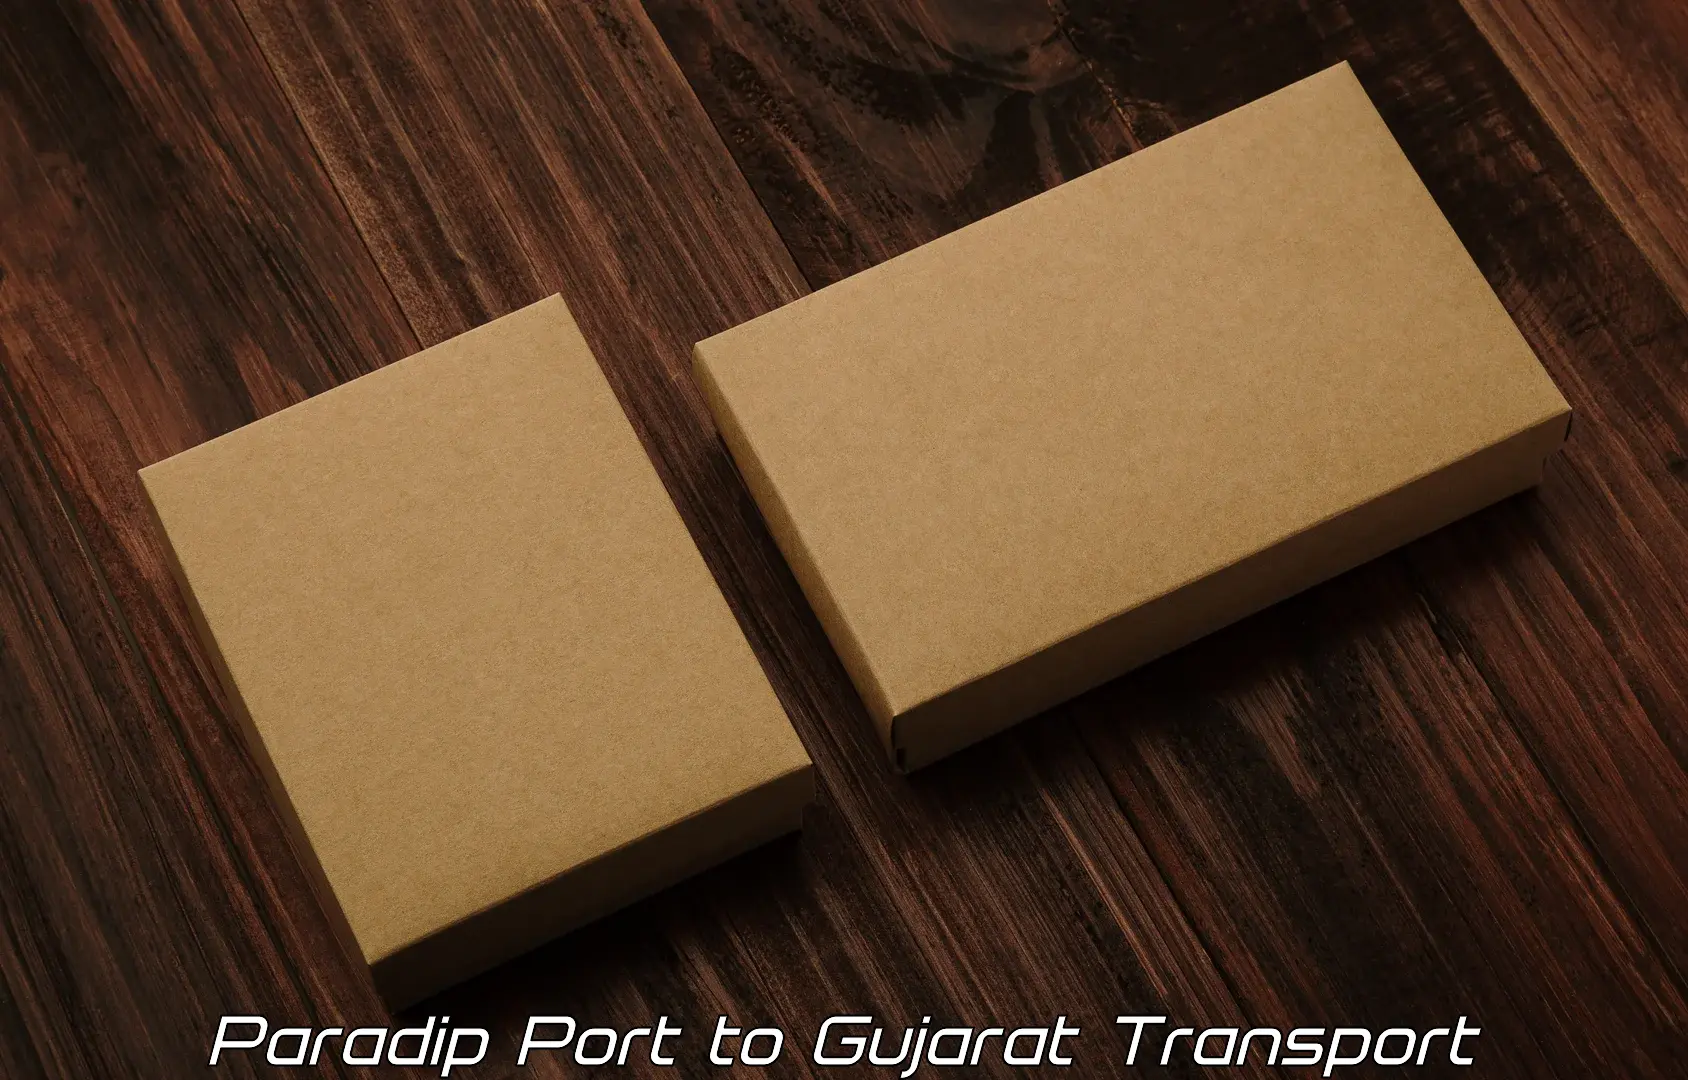 Nearby transport service Paradip Port to Dholka